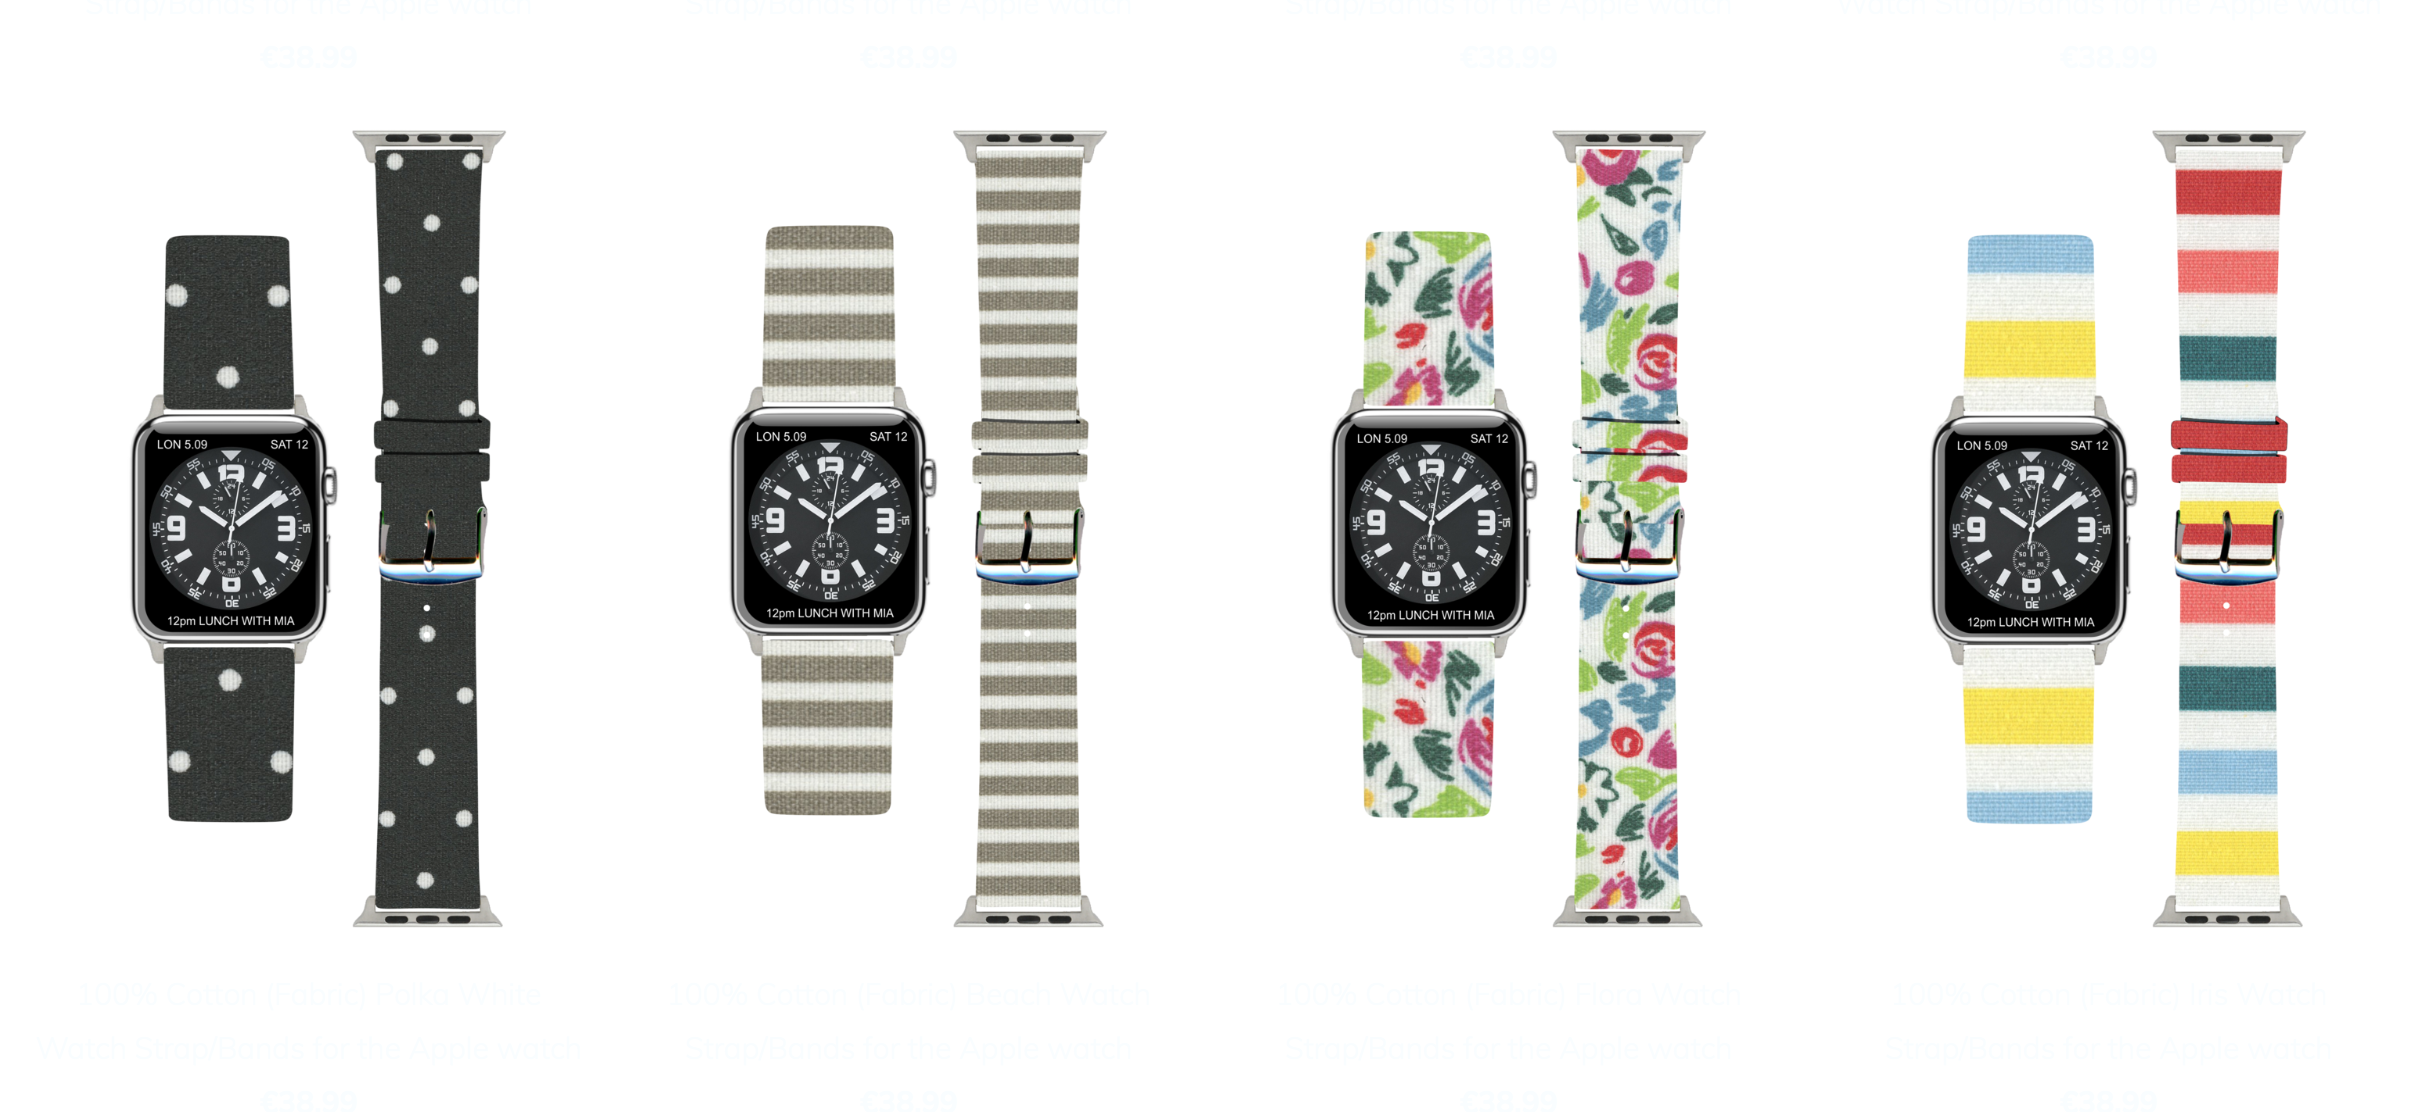 Fabricovers Apple Watch Bands Offer Unique Looks